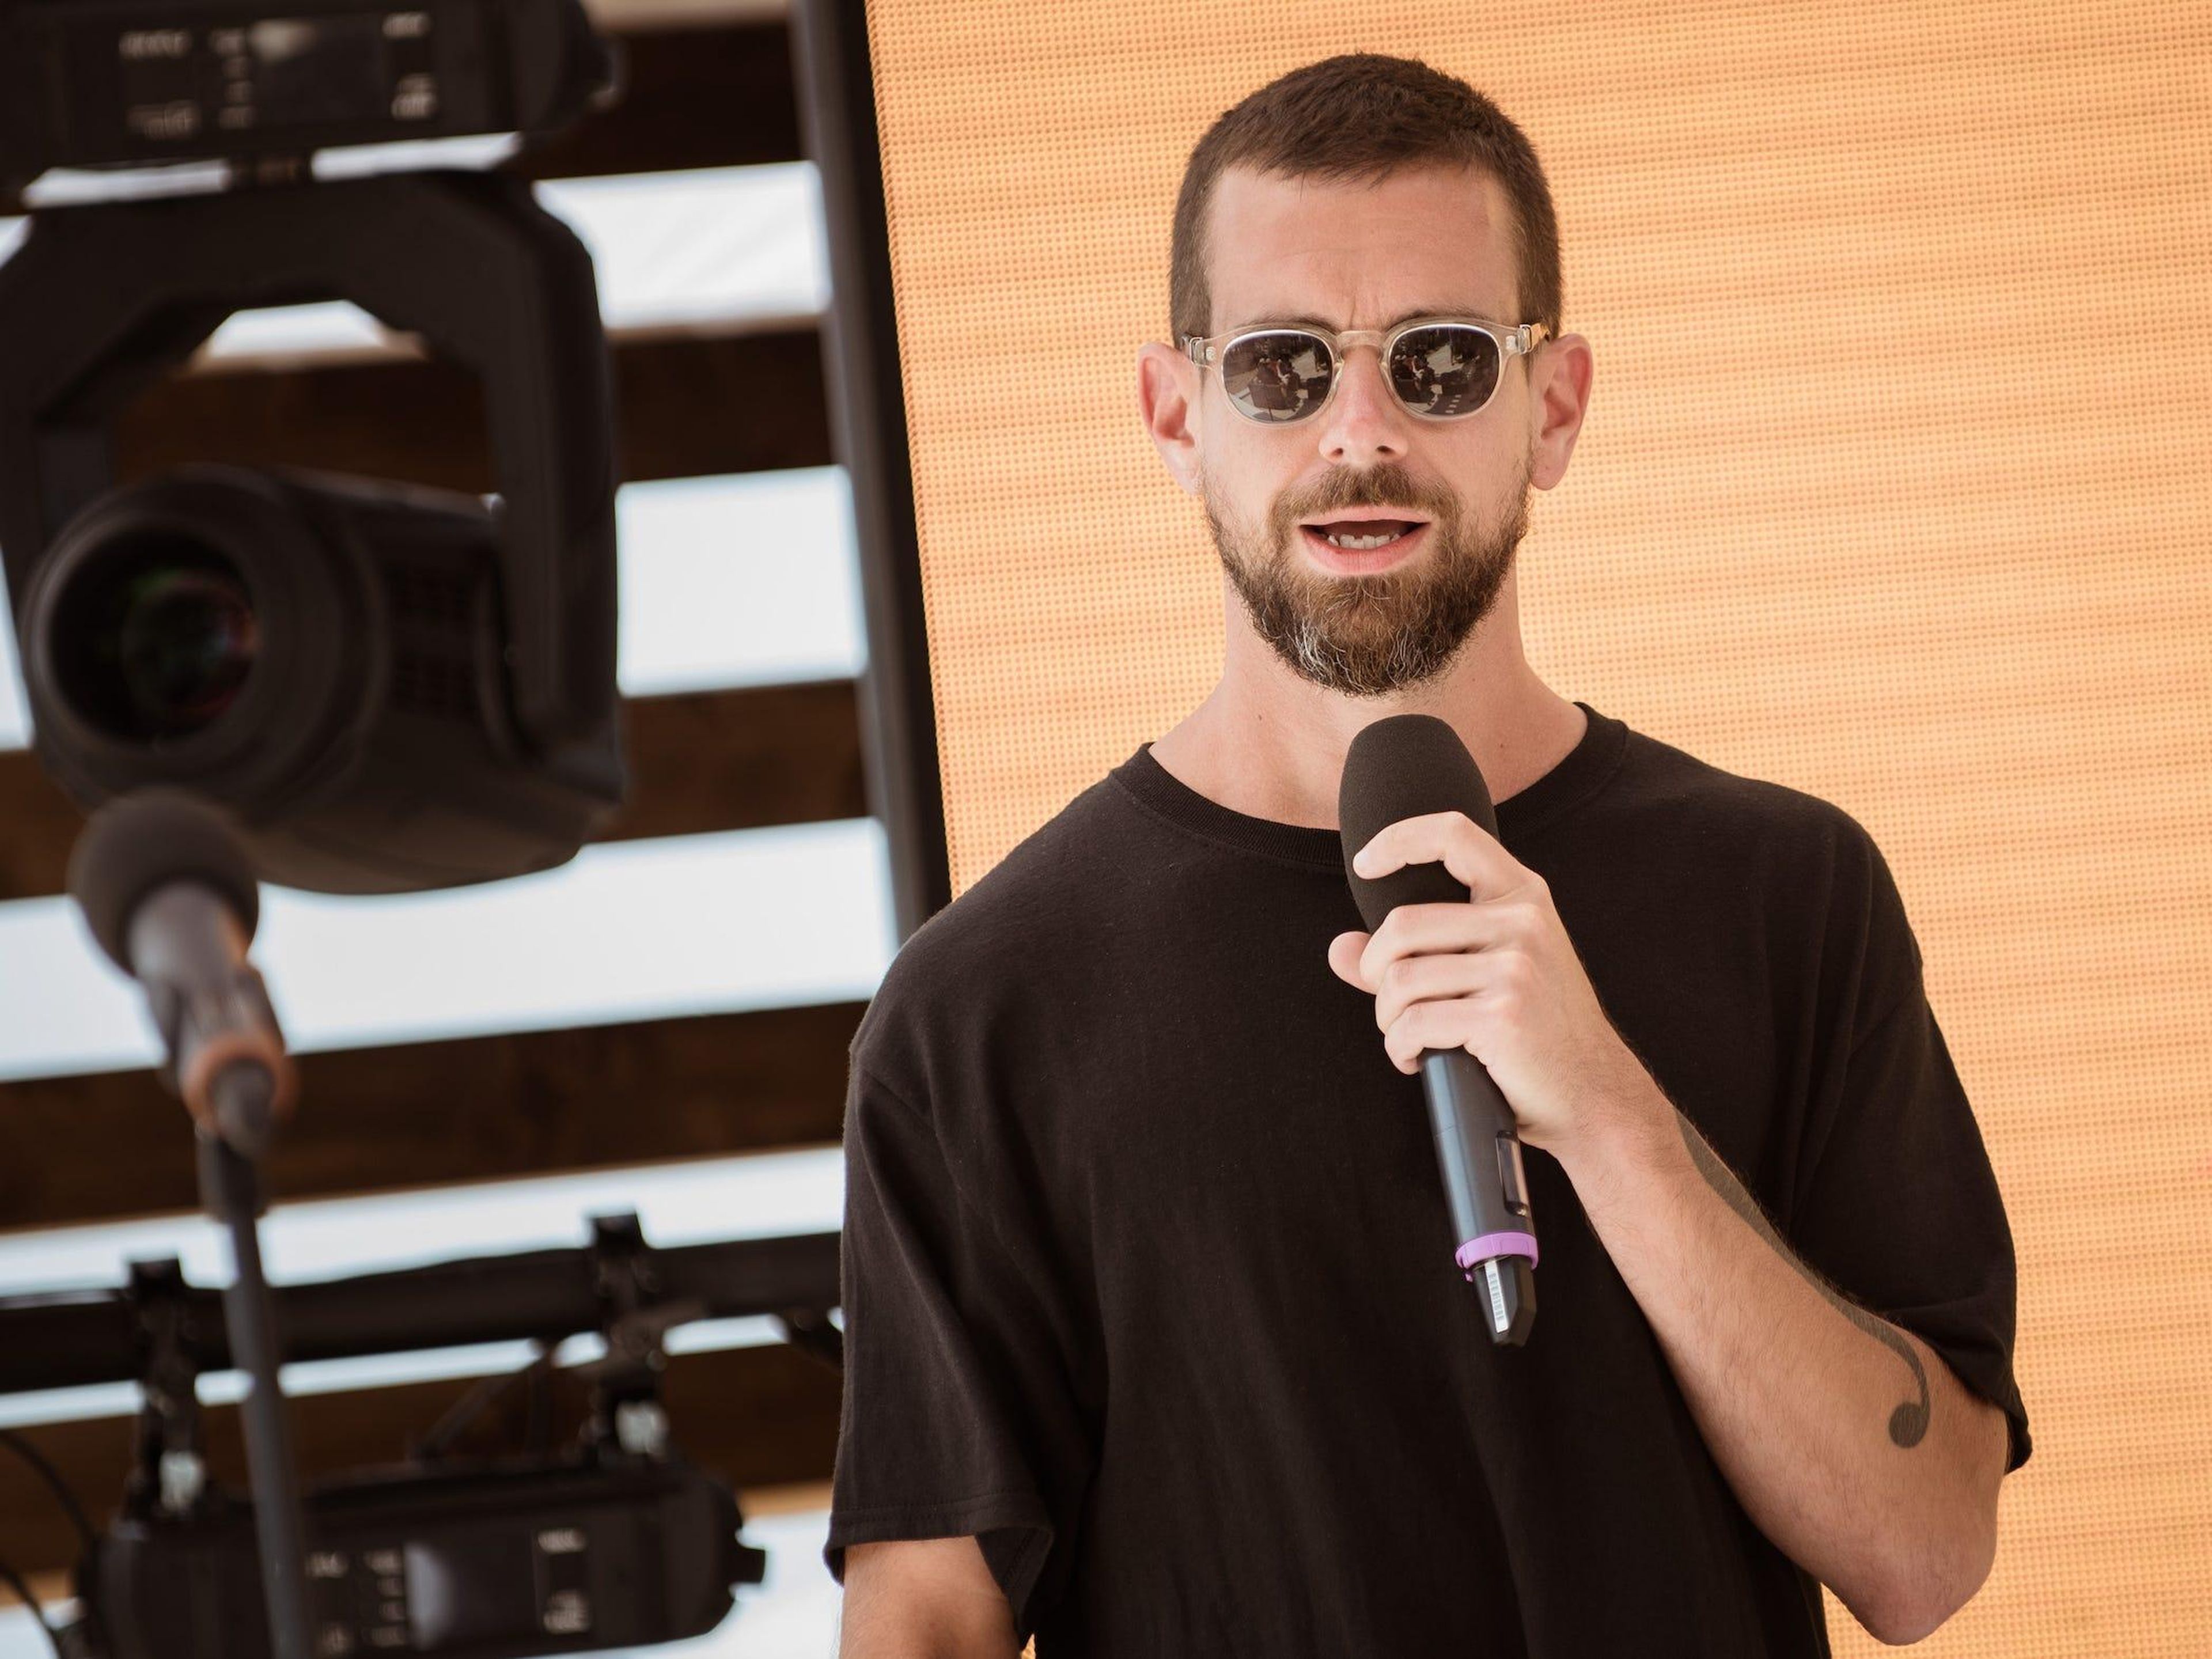 "The first time I did it, like day three, I felt like I was hallucinating," Dorsey said on the podcast. "It was a weird state to be in. But as I did it the next two times, it just became so apparent to me how much of our days are